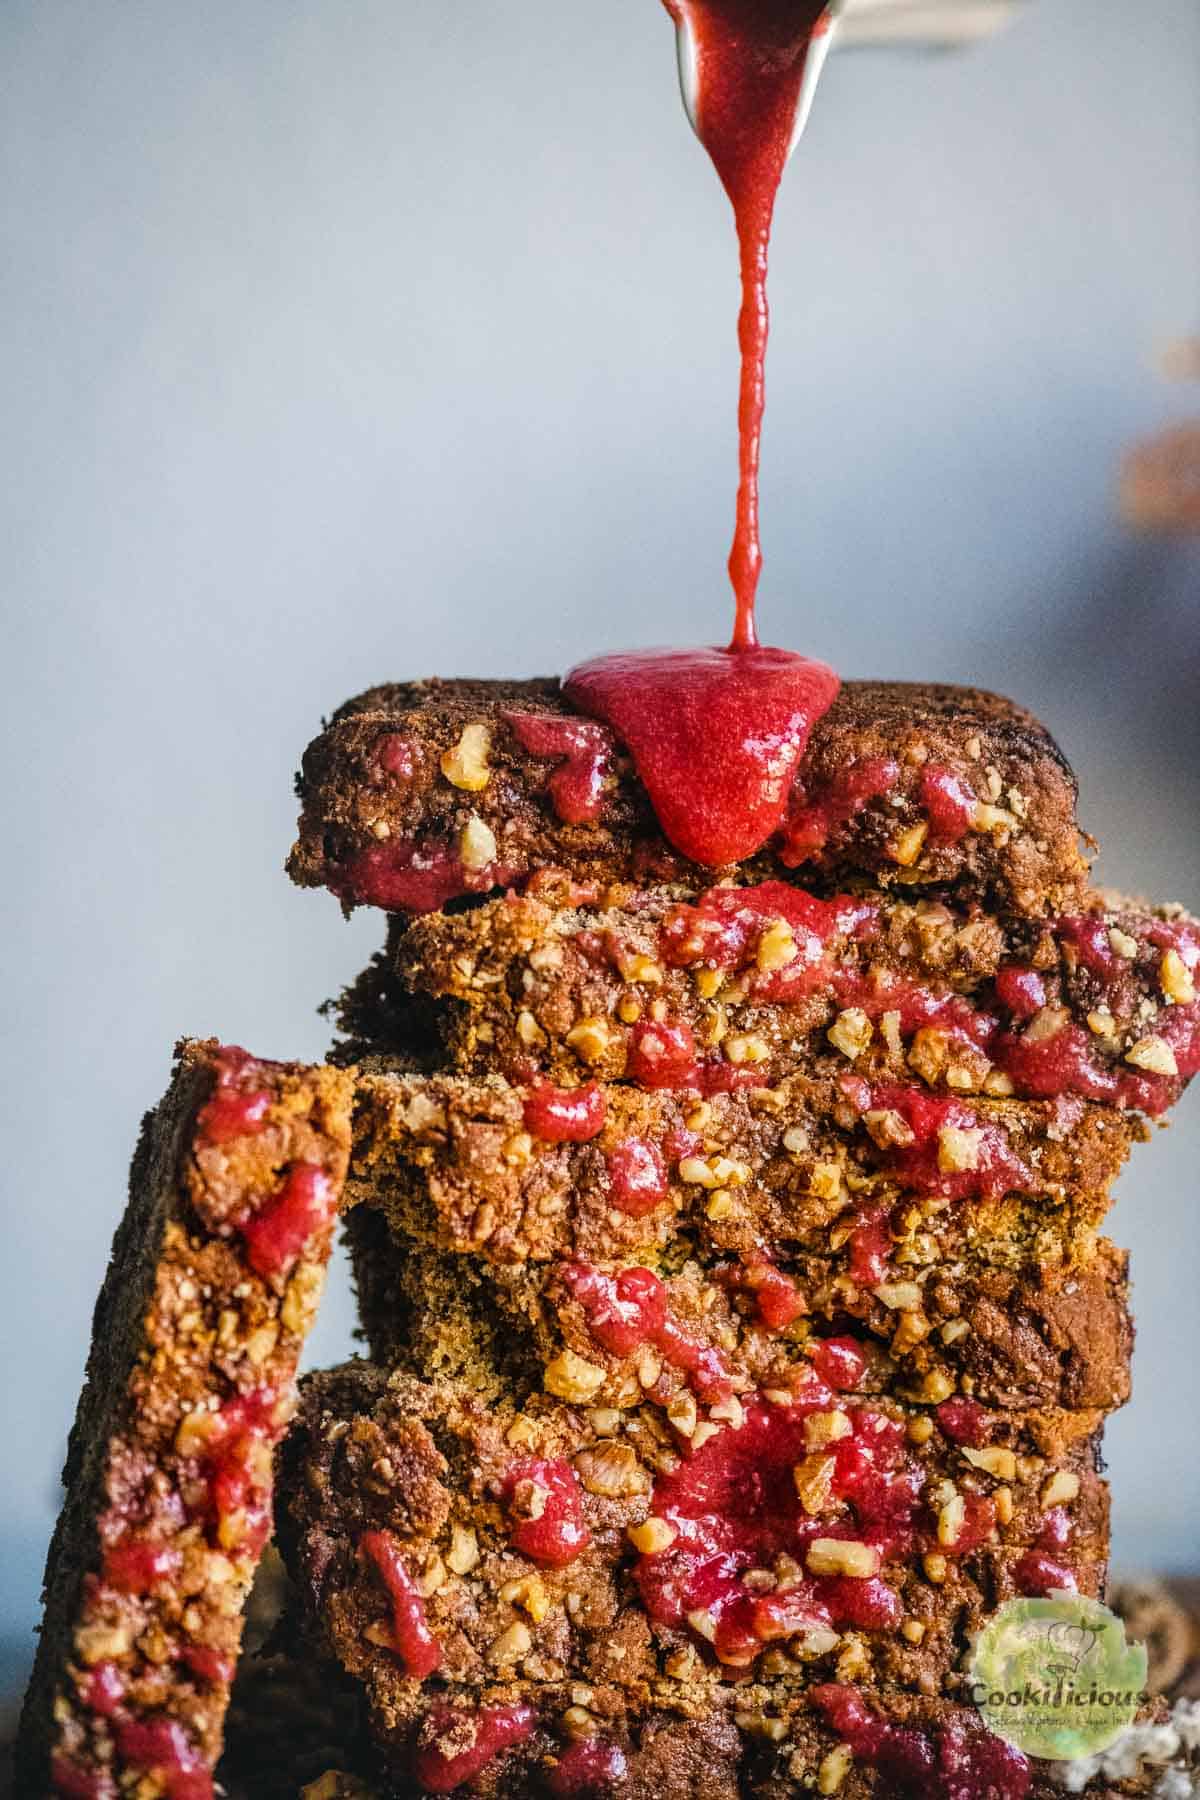 strawberry syrup being poured over a stack of Vegan Gluten-free Banana Strawberry Bread